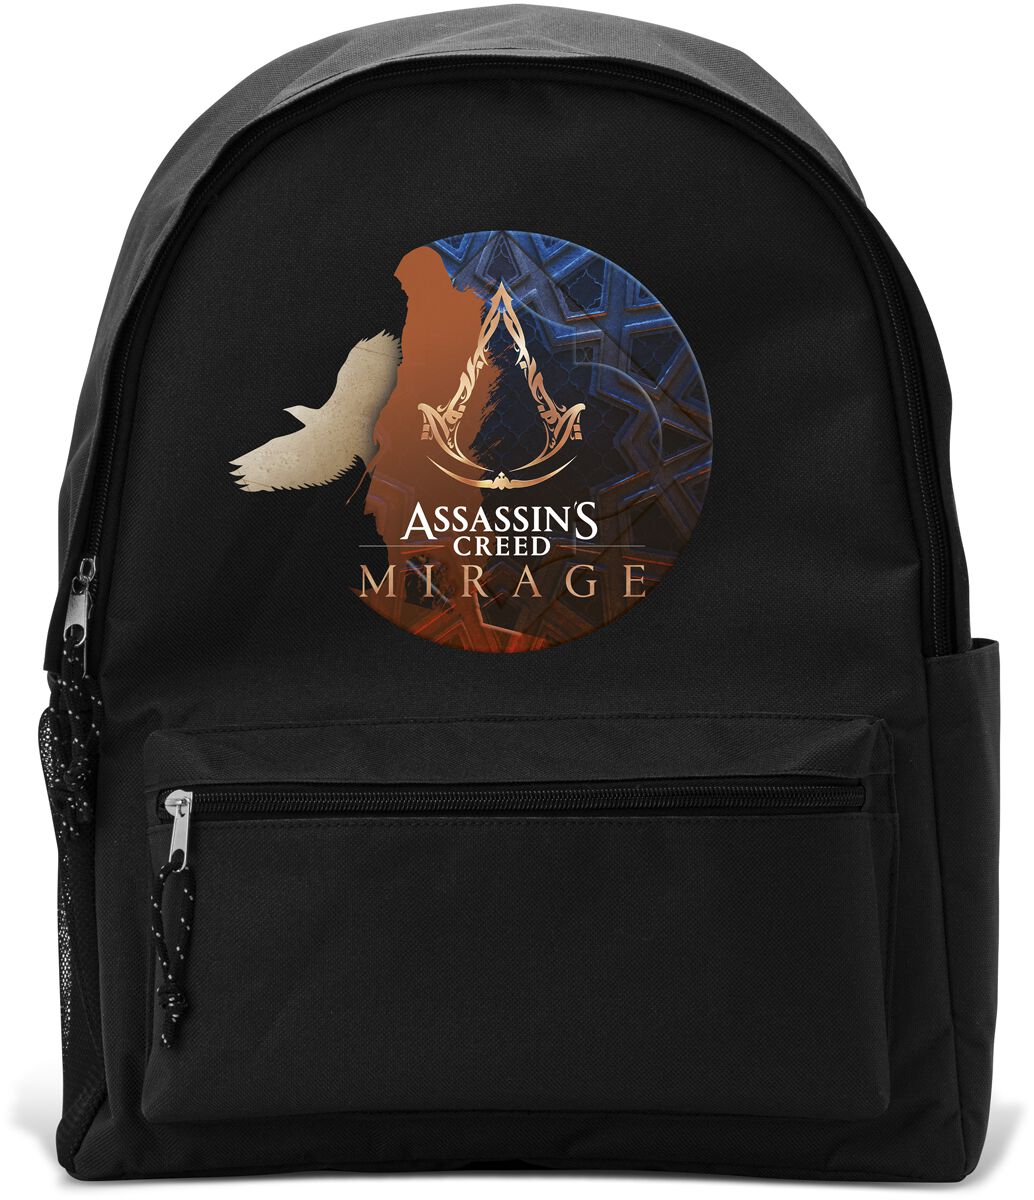 Image of Zaino Gaming di Assassin's Creed - Mirage - Backpack - Unisex - standard